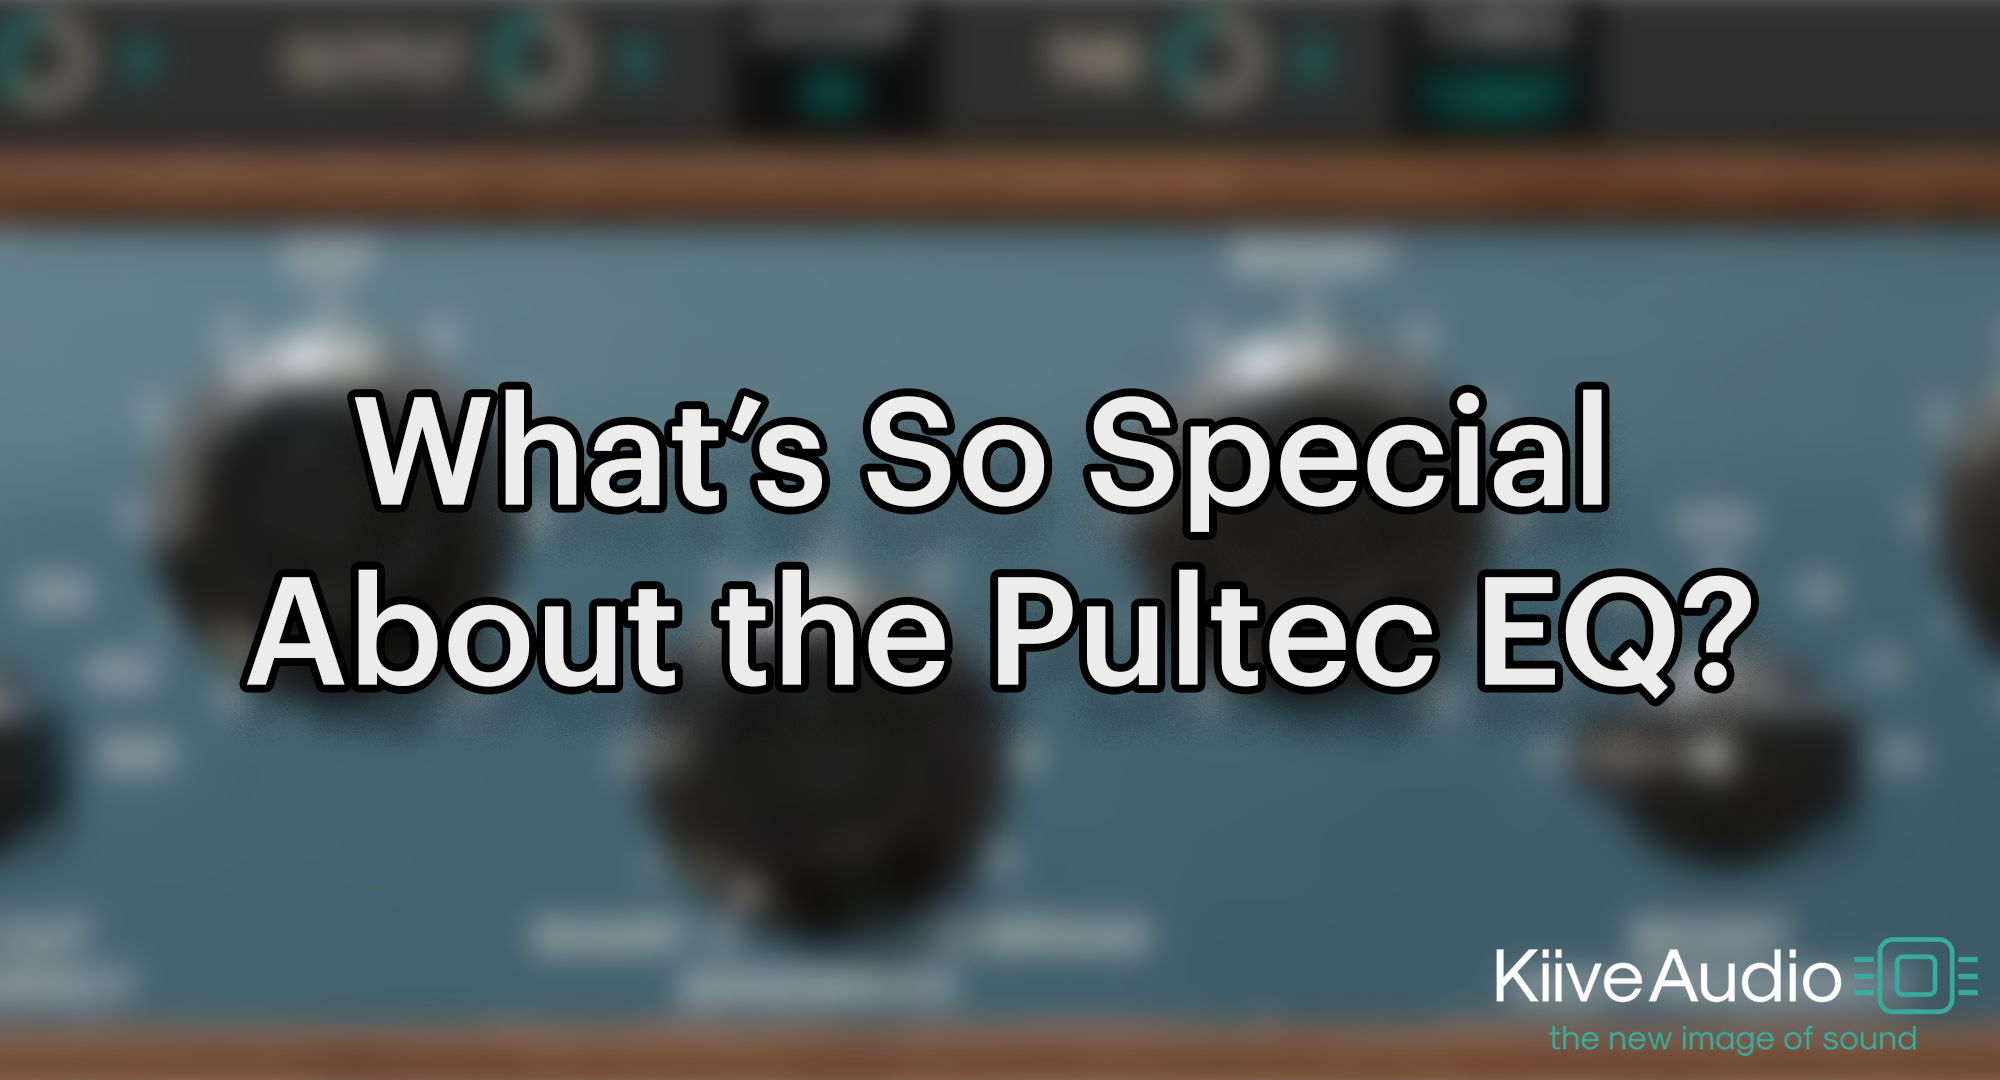 What’s So Special About the Pultec EQ?